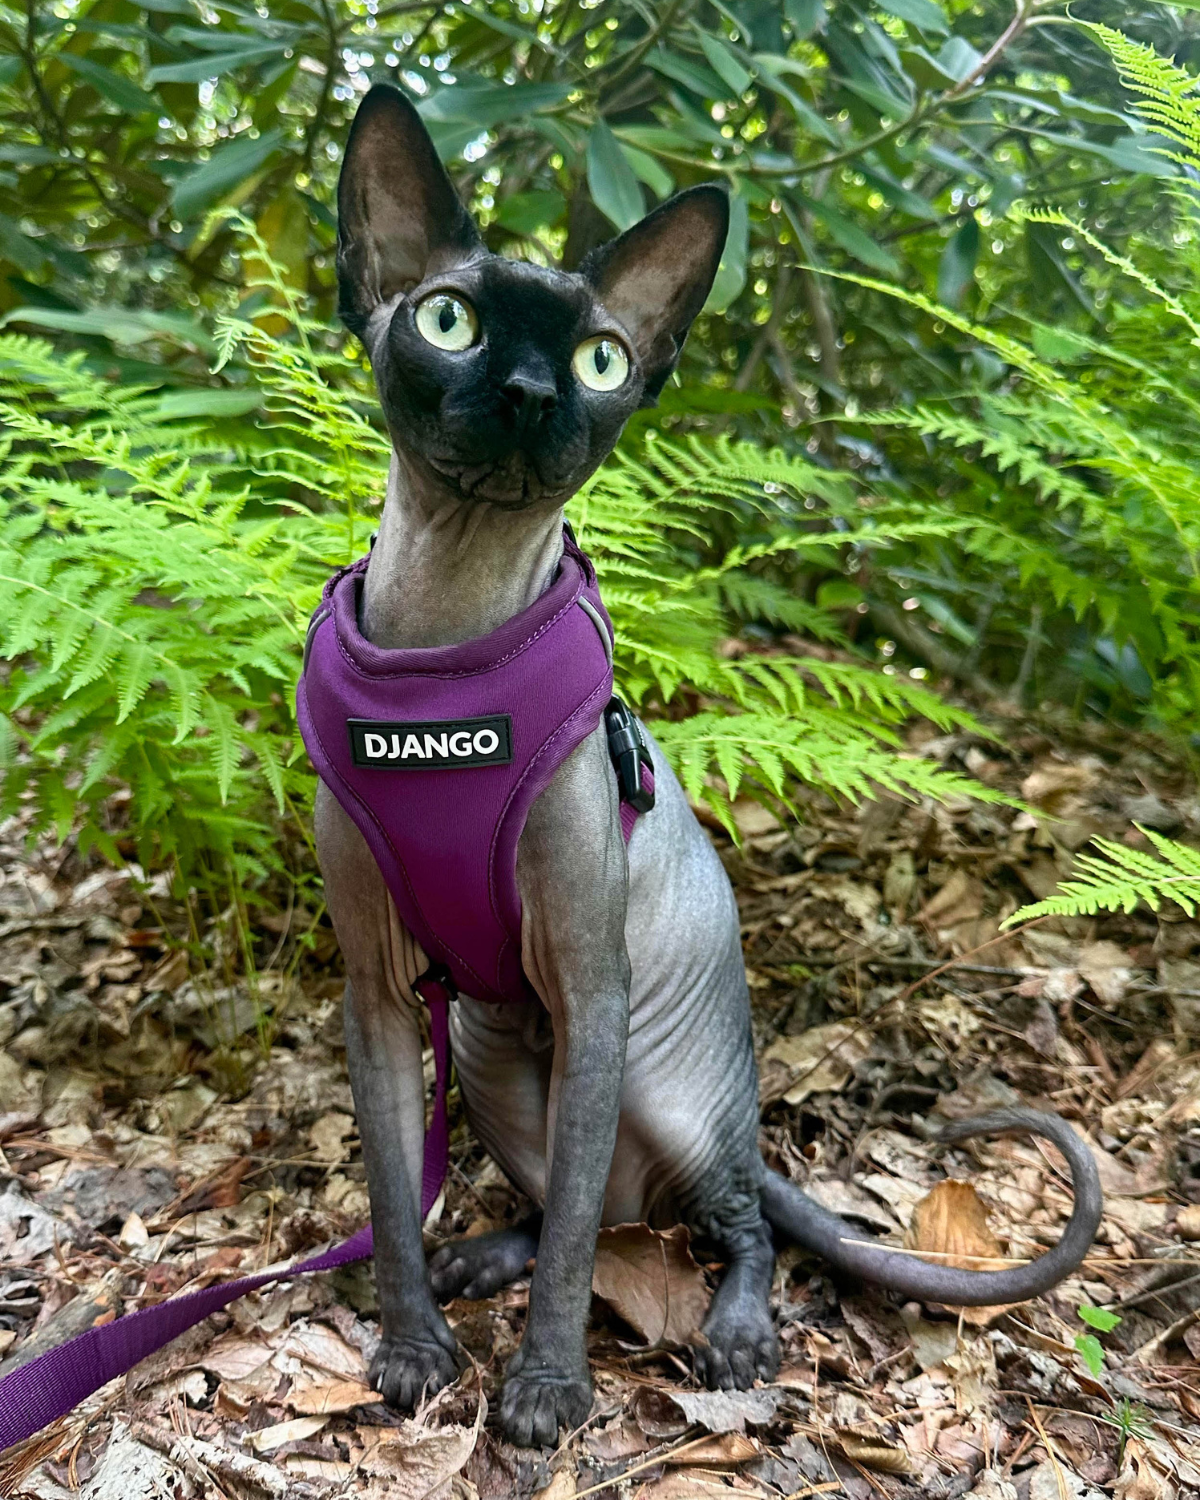 Estelle is a Sphinx cat and adventure cat from North Carolina! Considered the best harness for Sphinx cats, DJANGO's Adventure Cat Harness features a padded and lightweight harness body, breathable and quick-dry sport mesh lining, super soft custom webbing, and two side-release buckles for easy on and off. Four points of harness adjustment also ensure a custom fit no matter how your cat is sized. - djangobrand.com